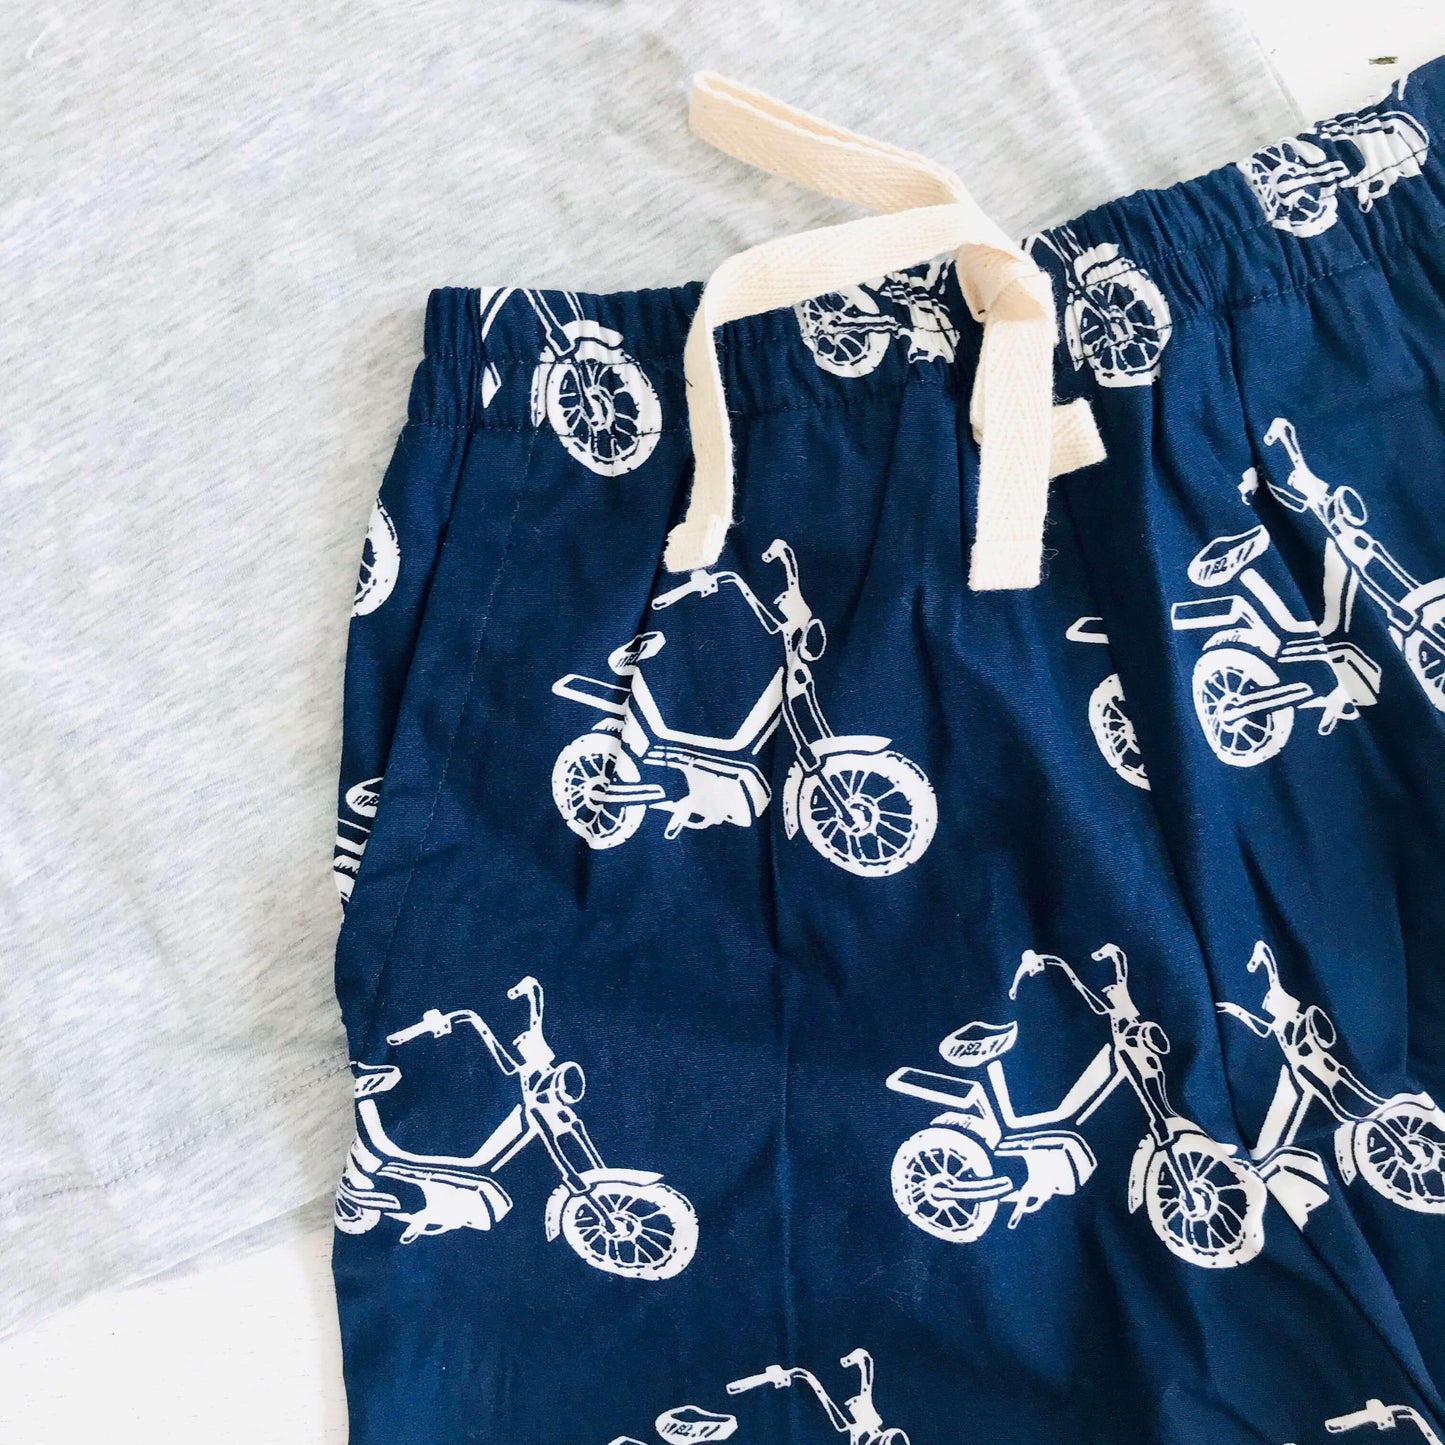 Caper Top & Shorts in Motorcycle Navy and Gray Stretch - Lil' Tati